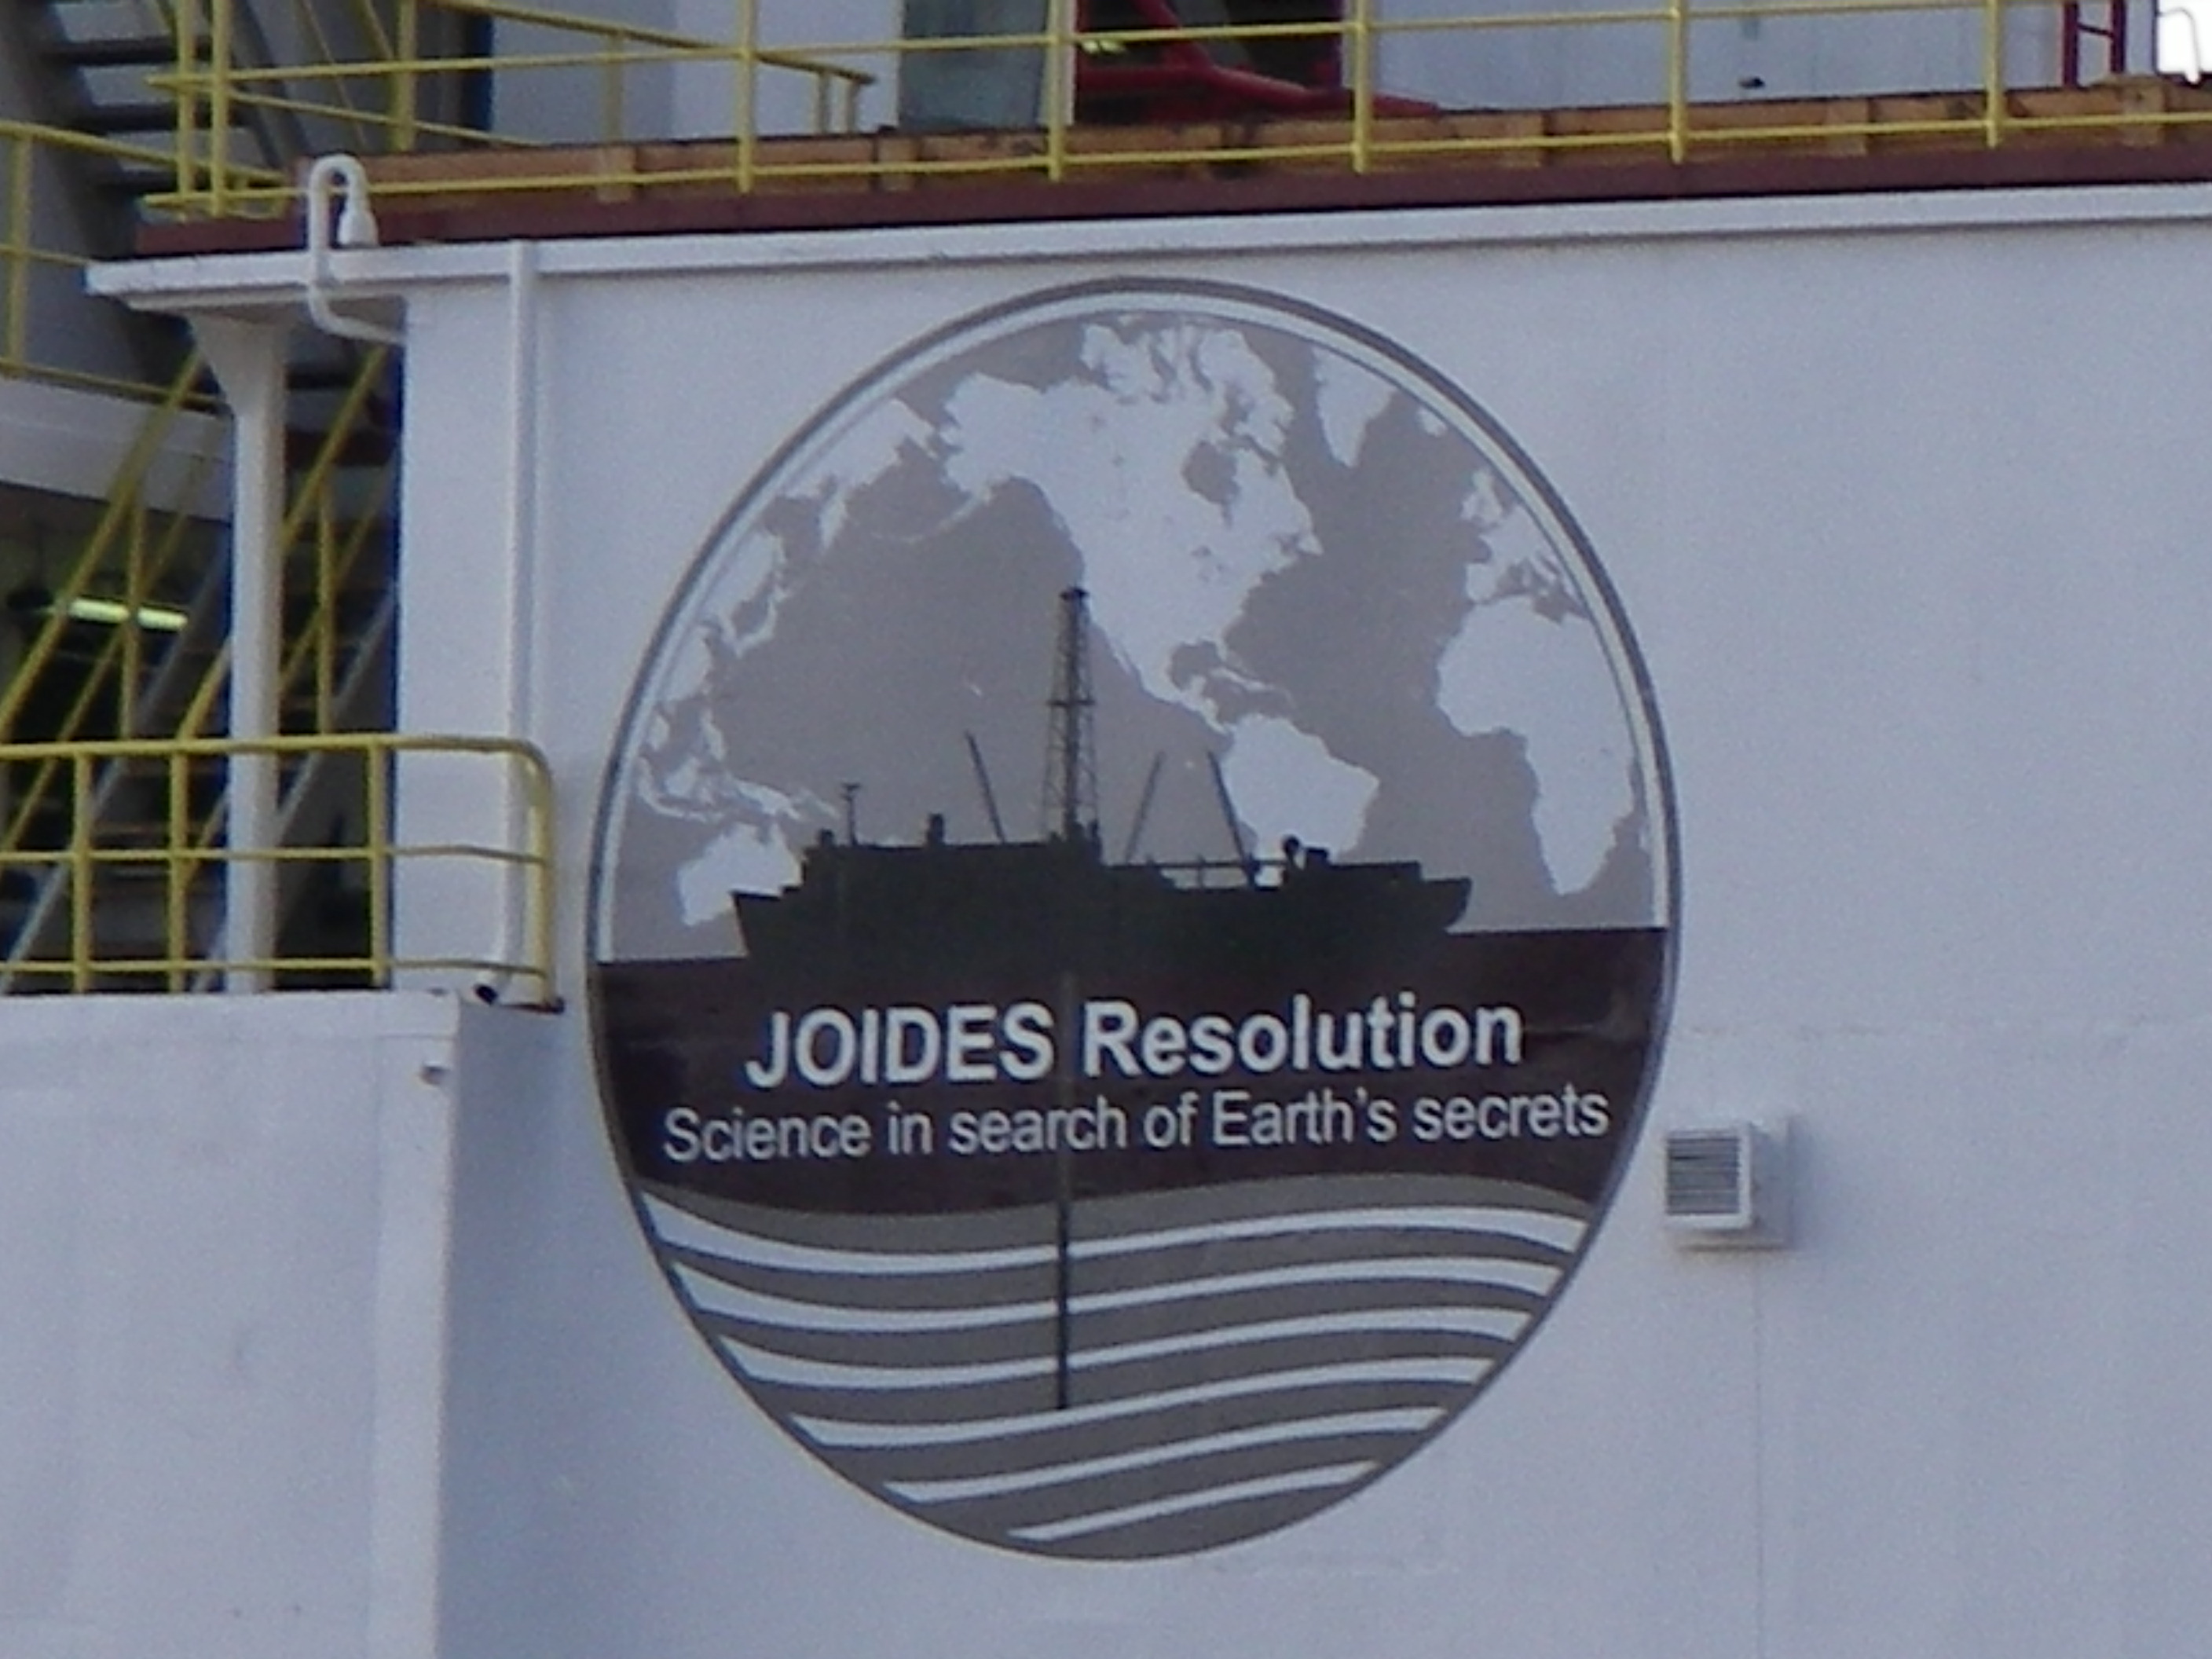 JOIDES Resolution - Science in Search of Earth's Secrets